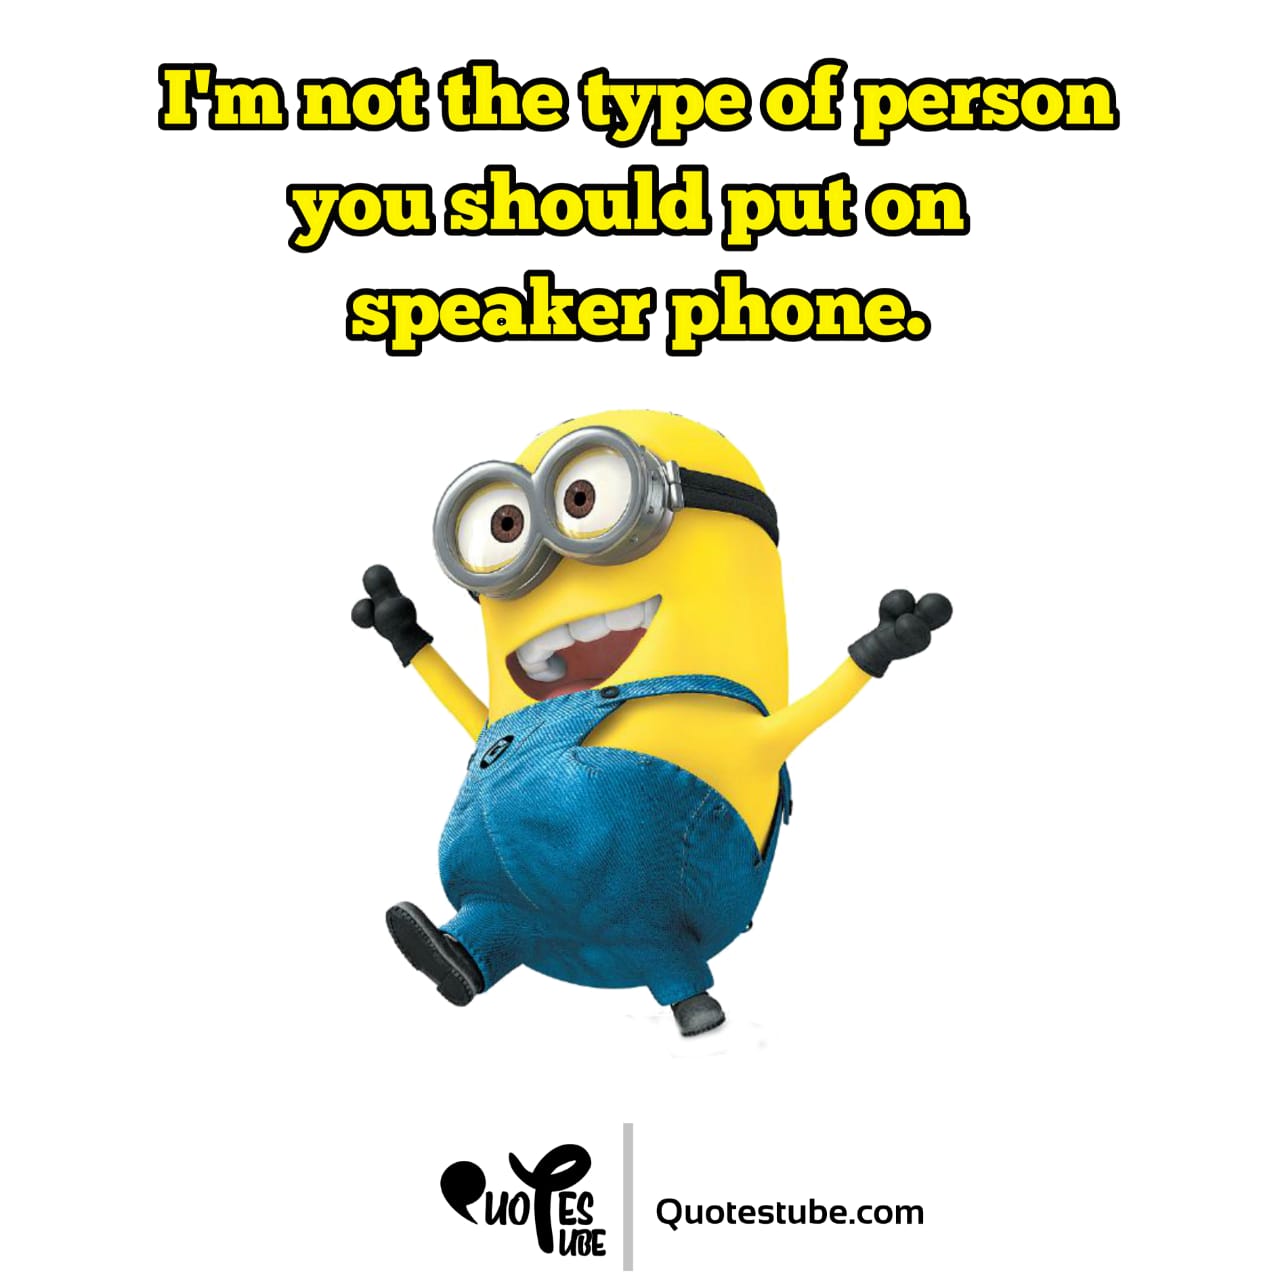 Famous Minion Quotes From The Movie – Quotes Tube